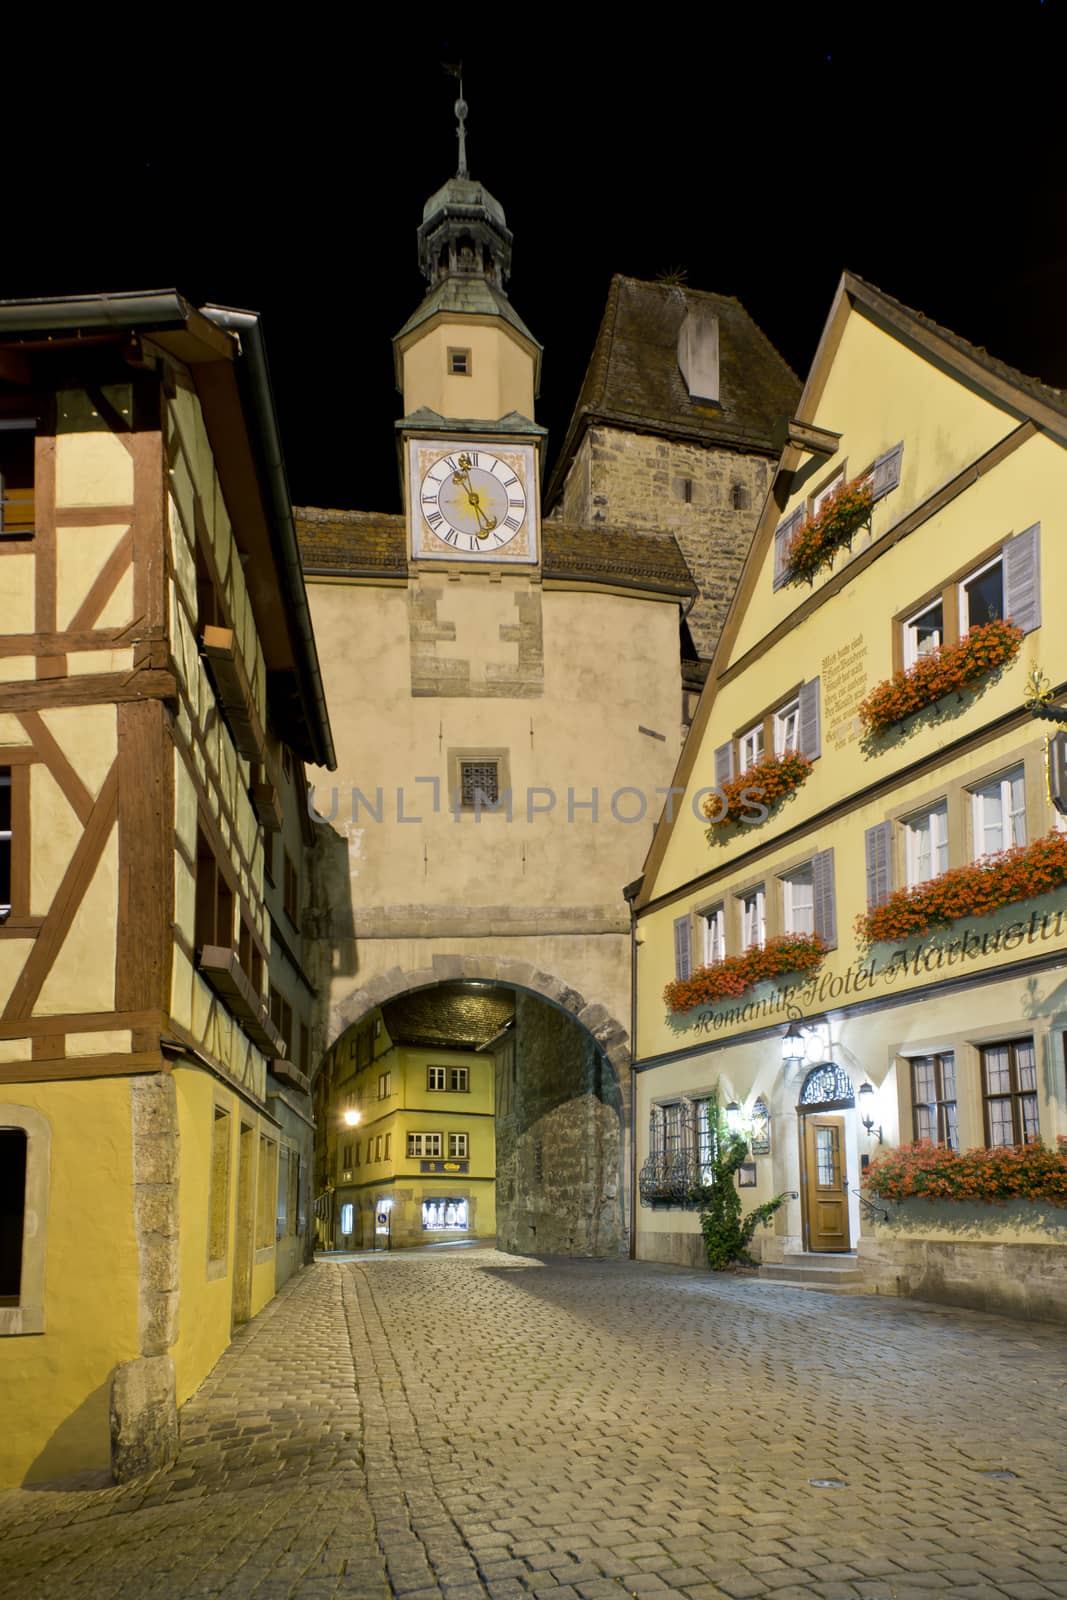 Night shot at one gate of the medieval town of Rothenburg ob der Tauber in Bavaria